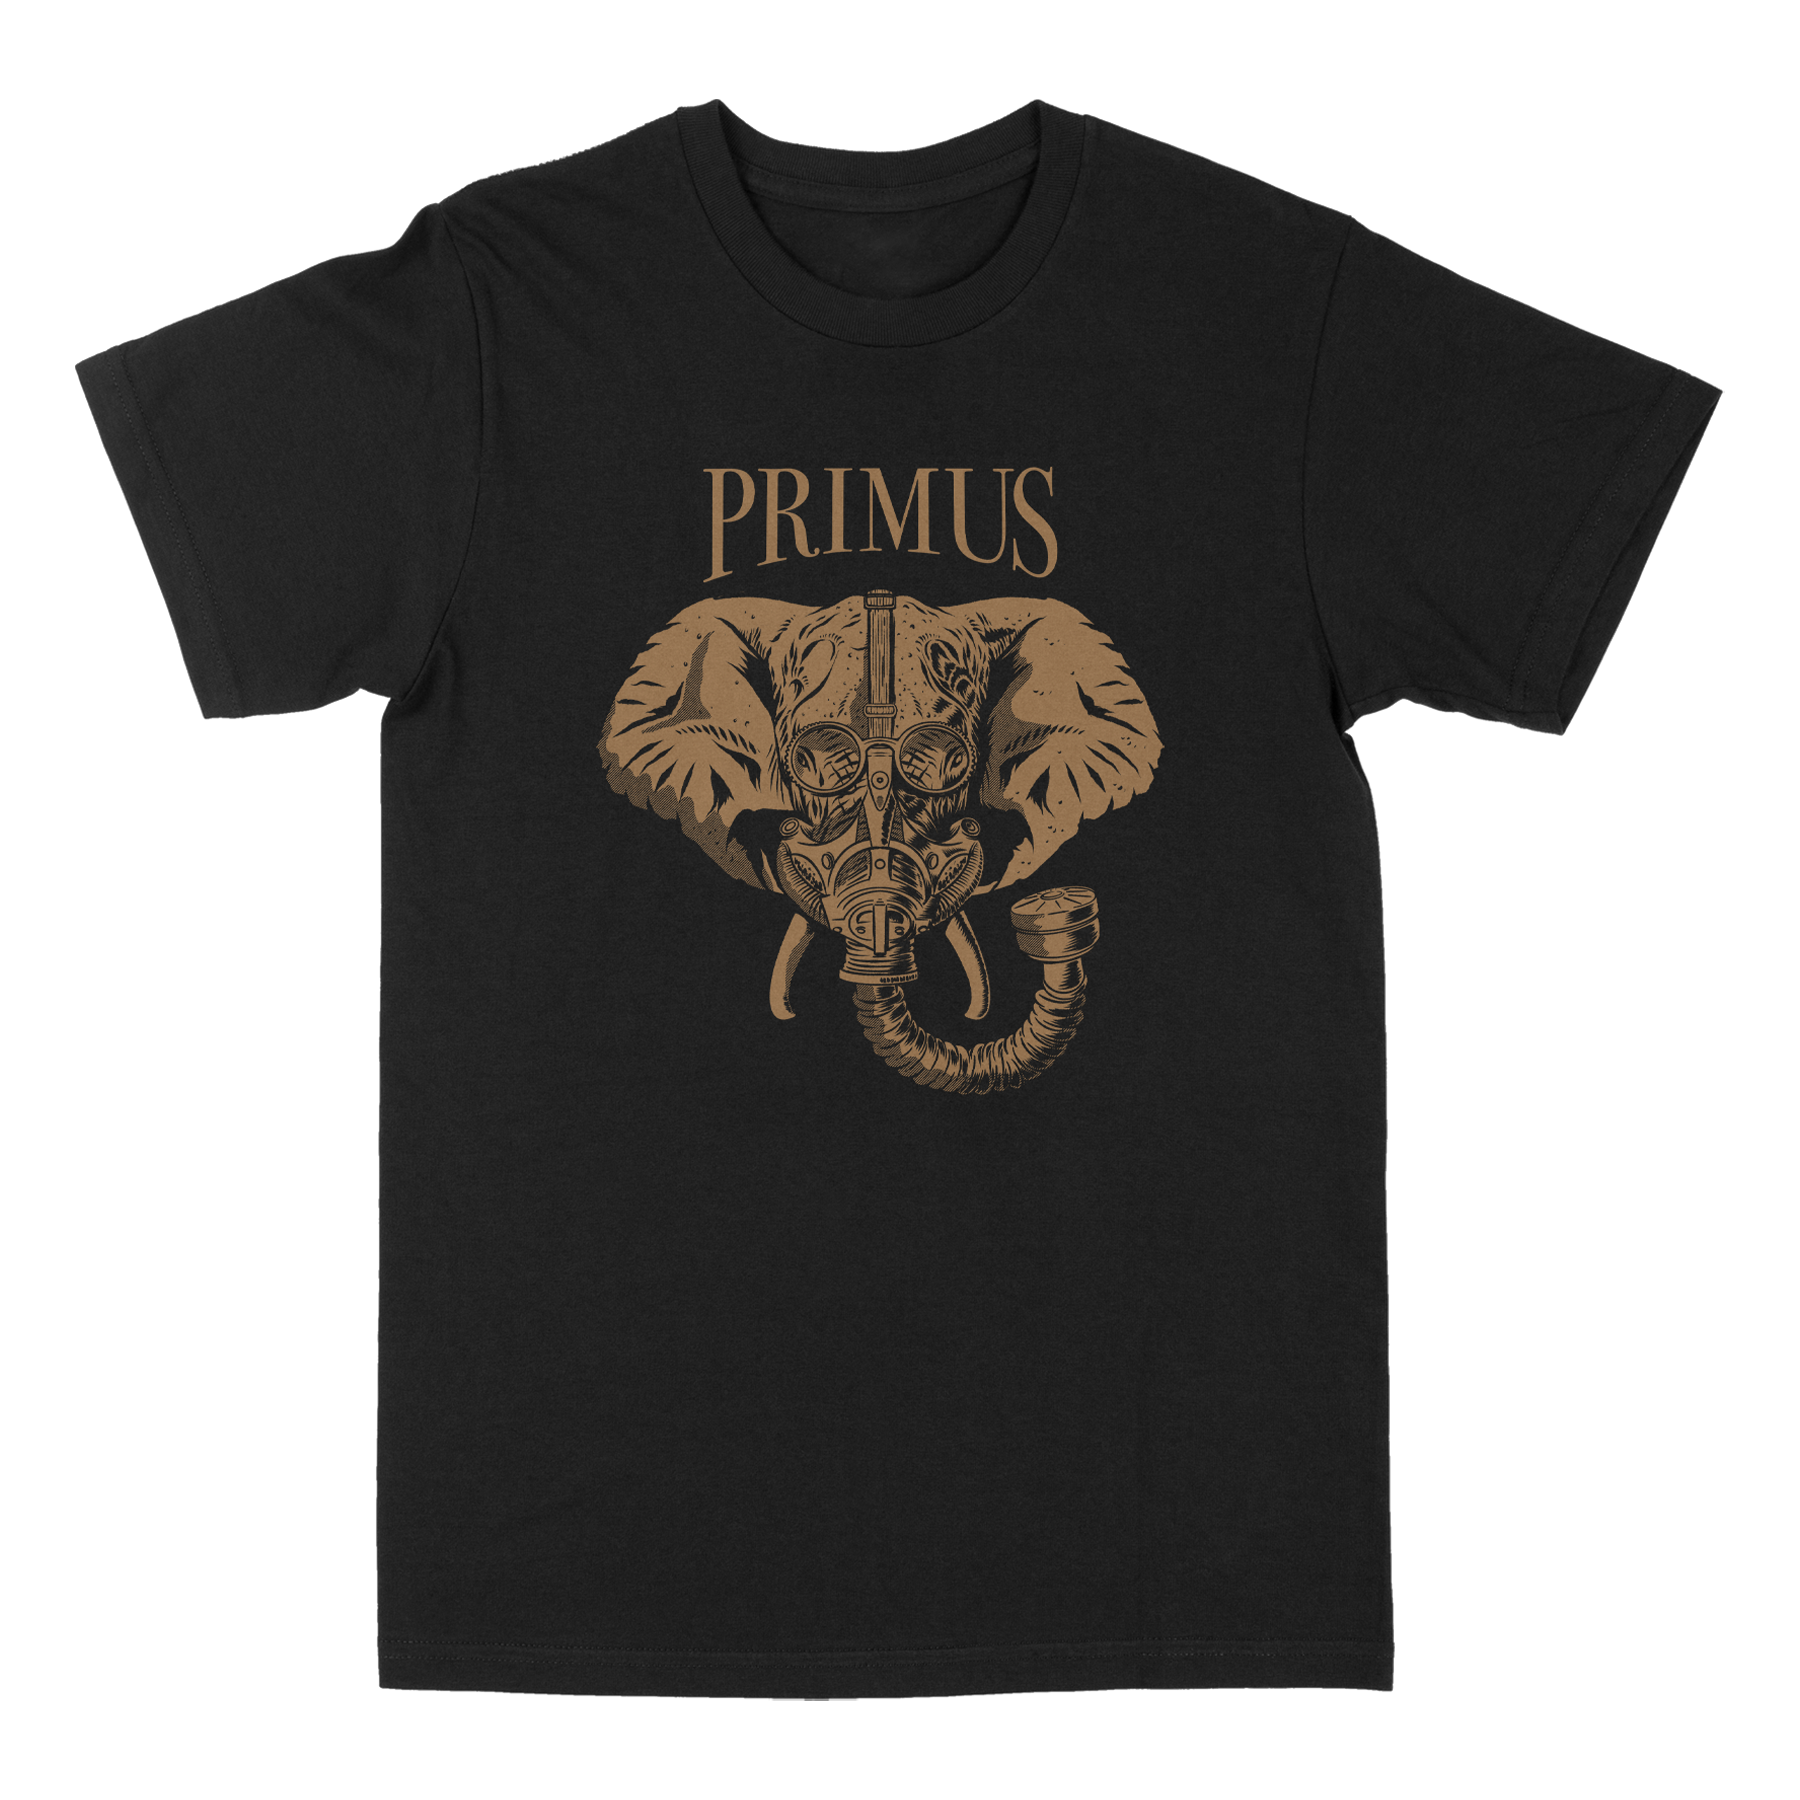 Primus - Pachy Mask T-Shirt